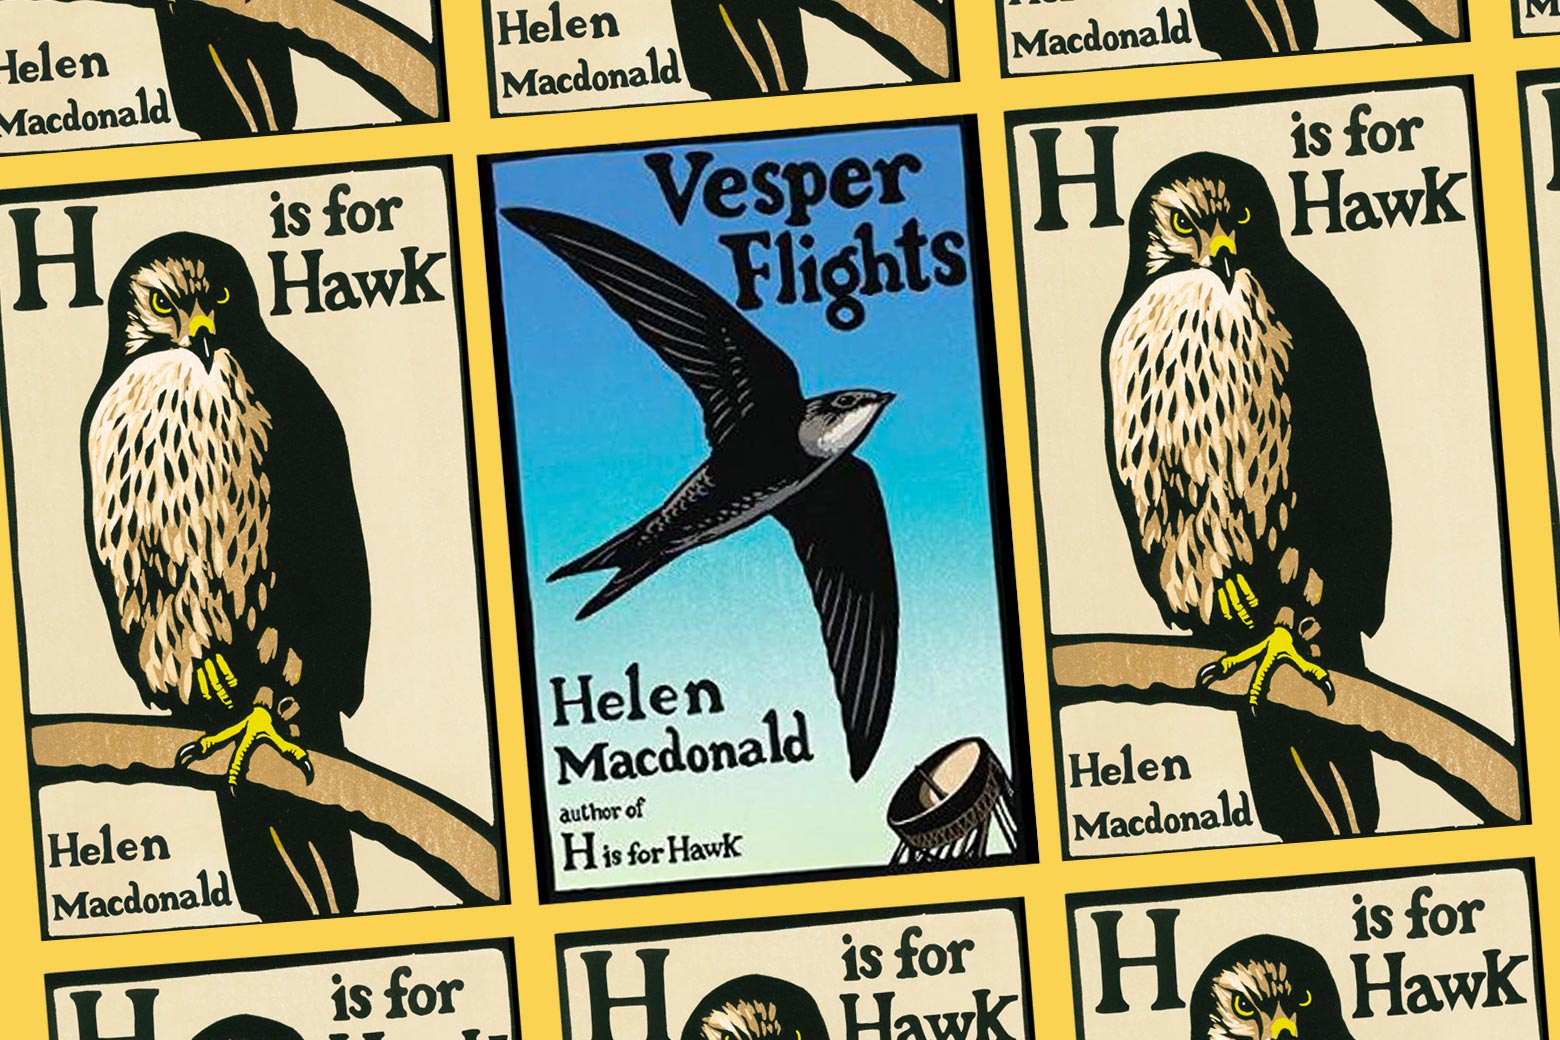 The cover of Vesper Flights, surrounded by multiple images of the cover of H Is for Hawk